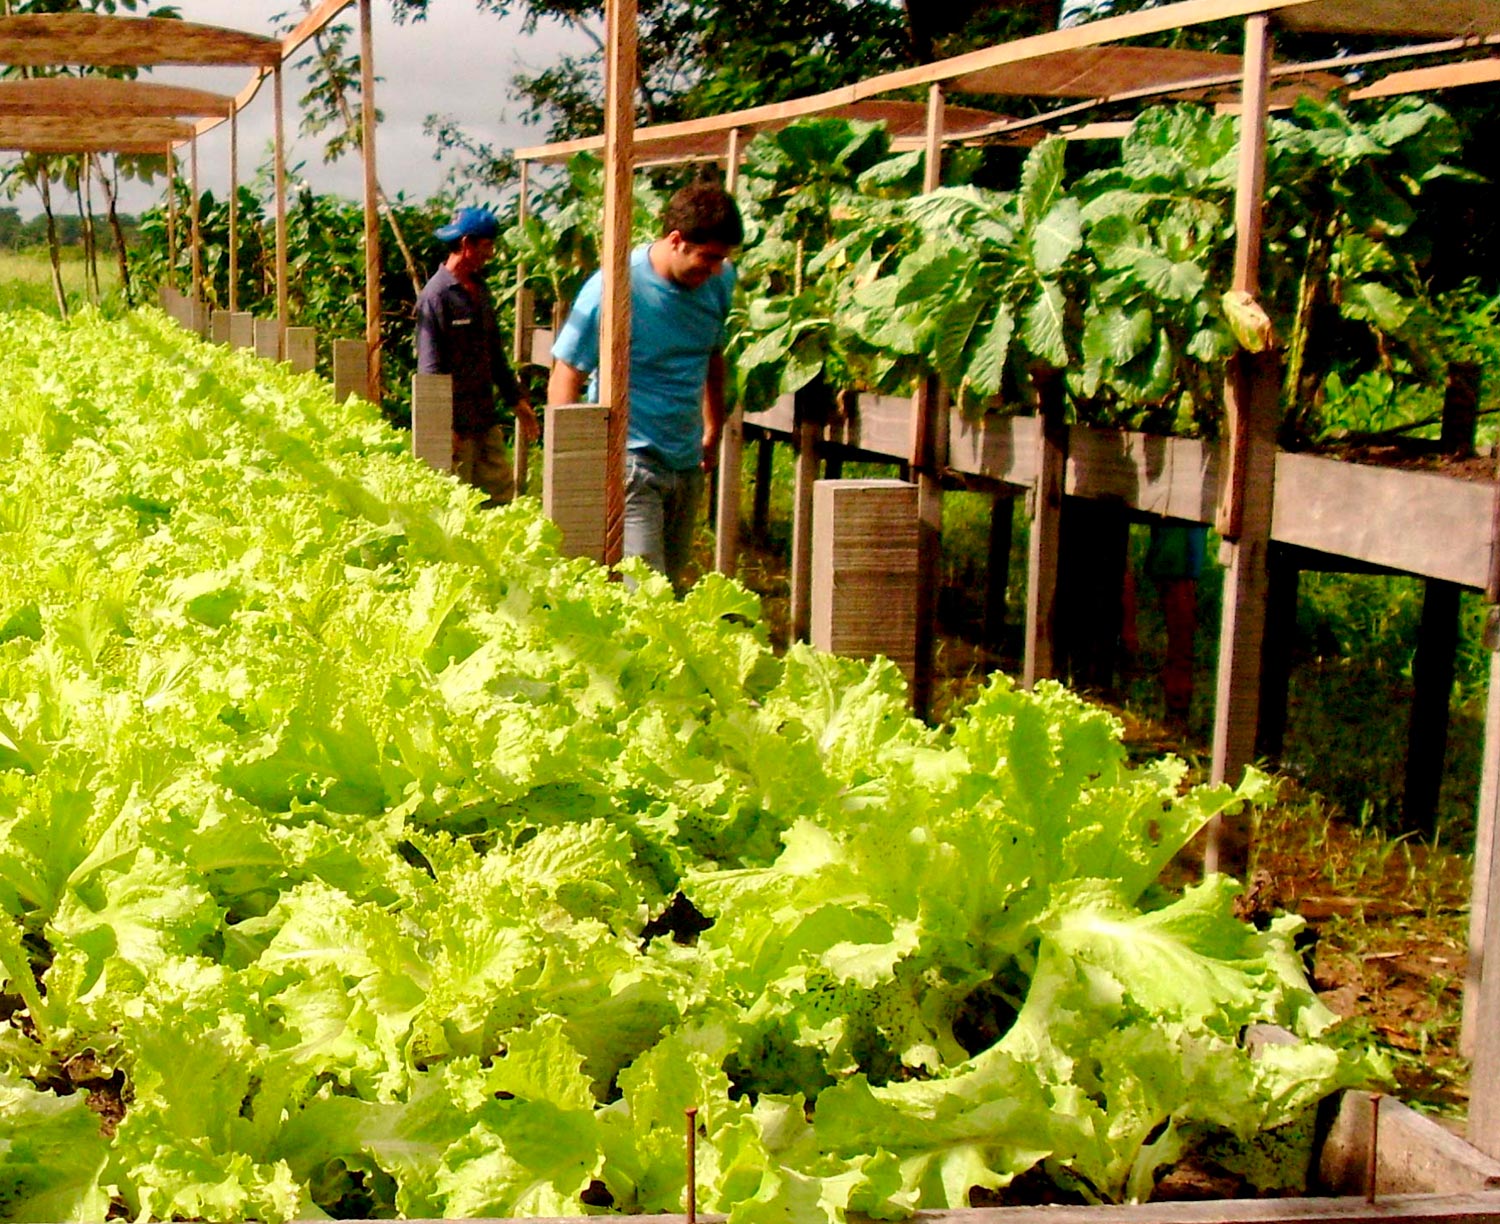 Rows of lettuce from vegetable production supported by the BR RedEAmérica Fund, with two men walking the rows in the background.